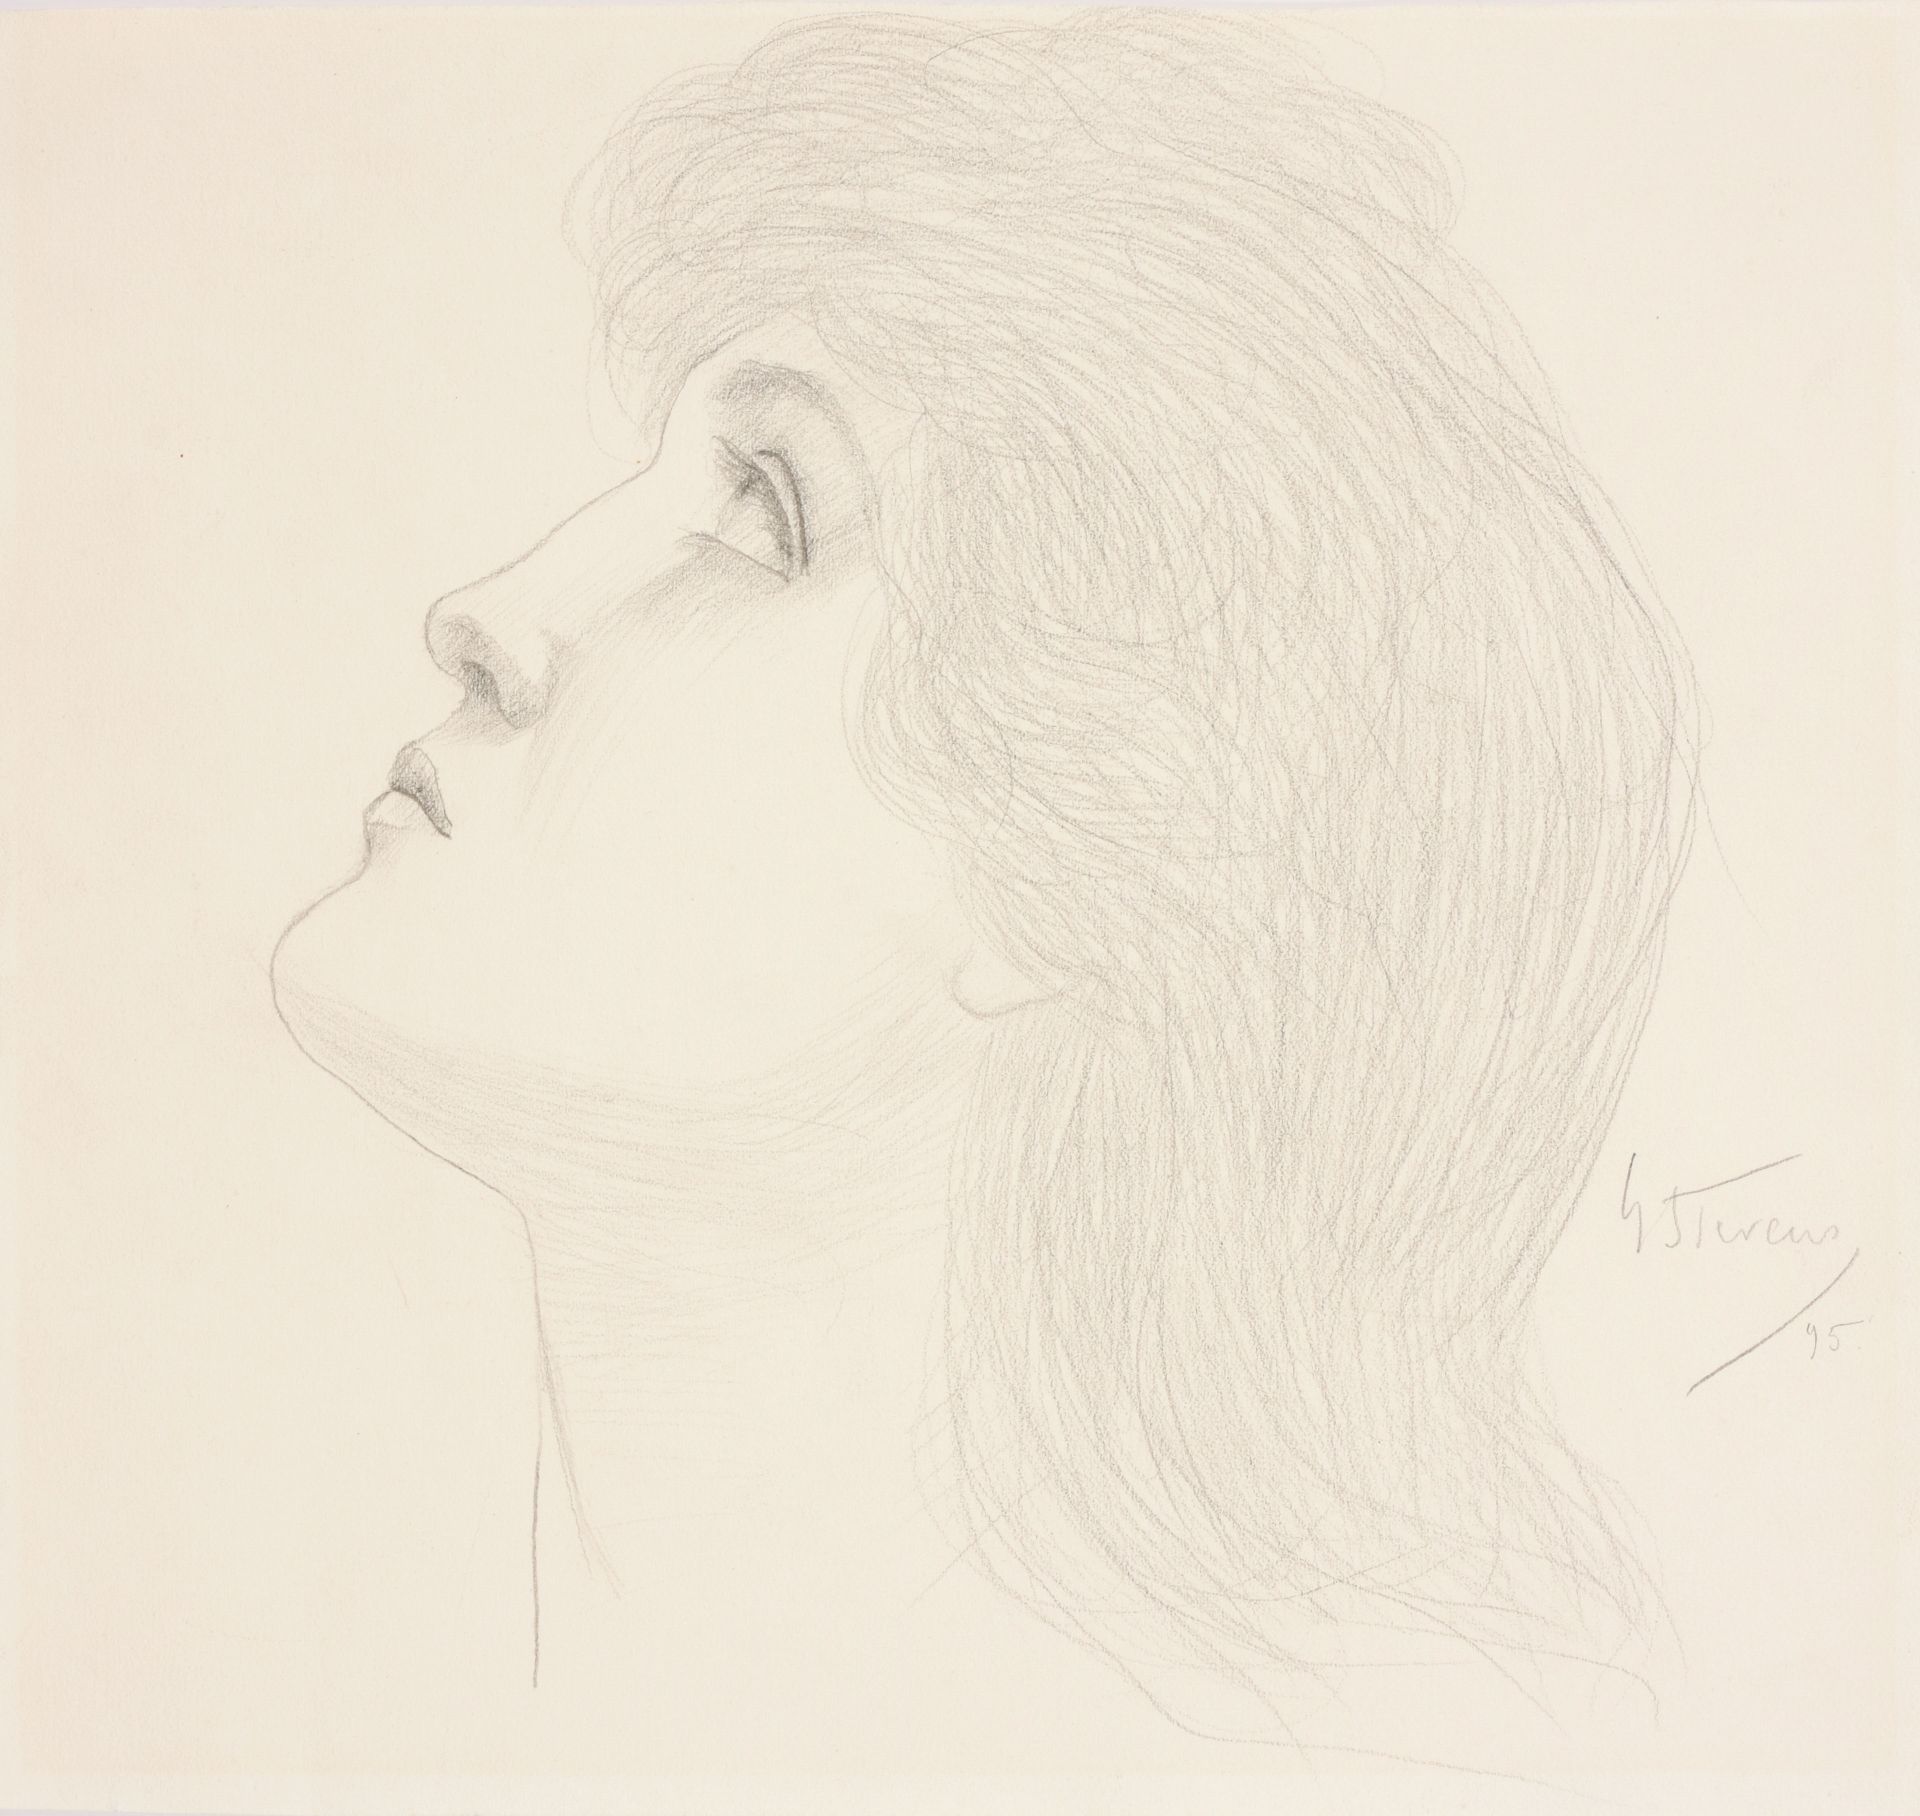 STEVENS, Gustave- Max (1871-1946) Women's heads (1895)

Two pencil drawings (29.&hellip;